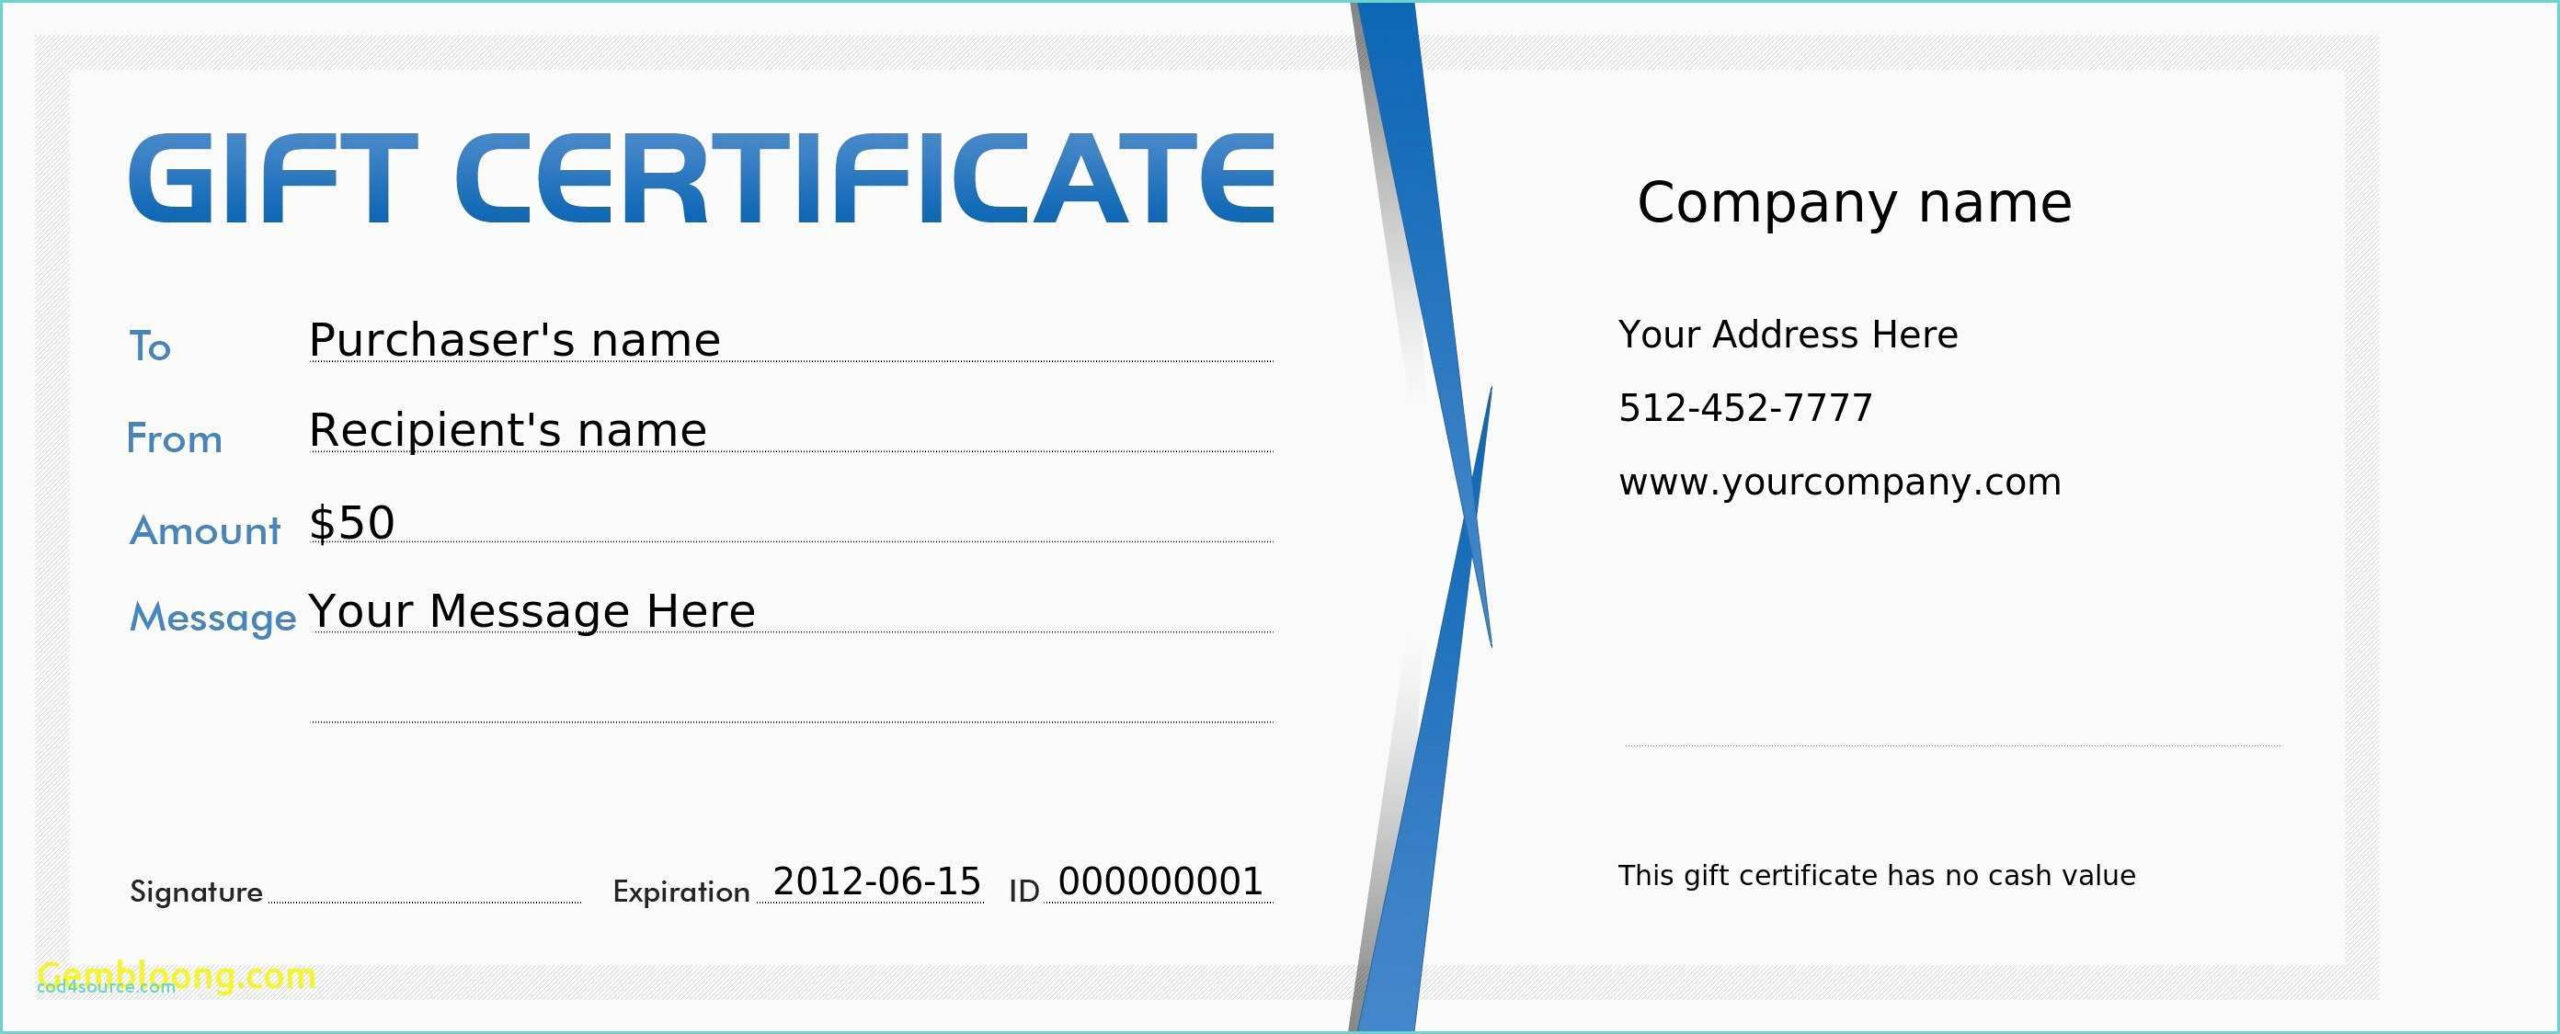 Gift Certificate Template Microsoft Publisher Pertaining To Gift Certificate Template Publisher